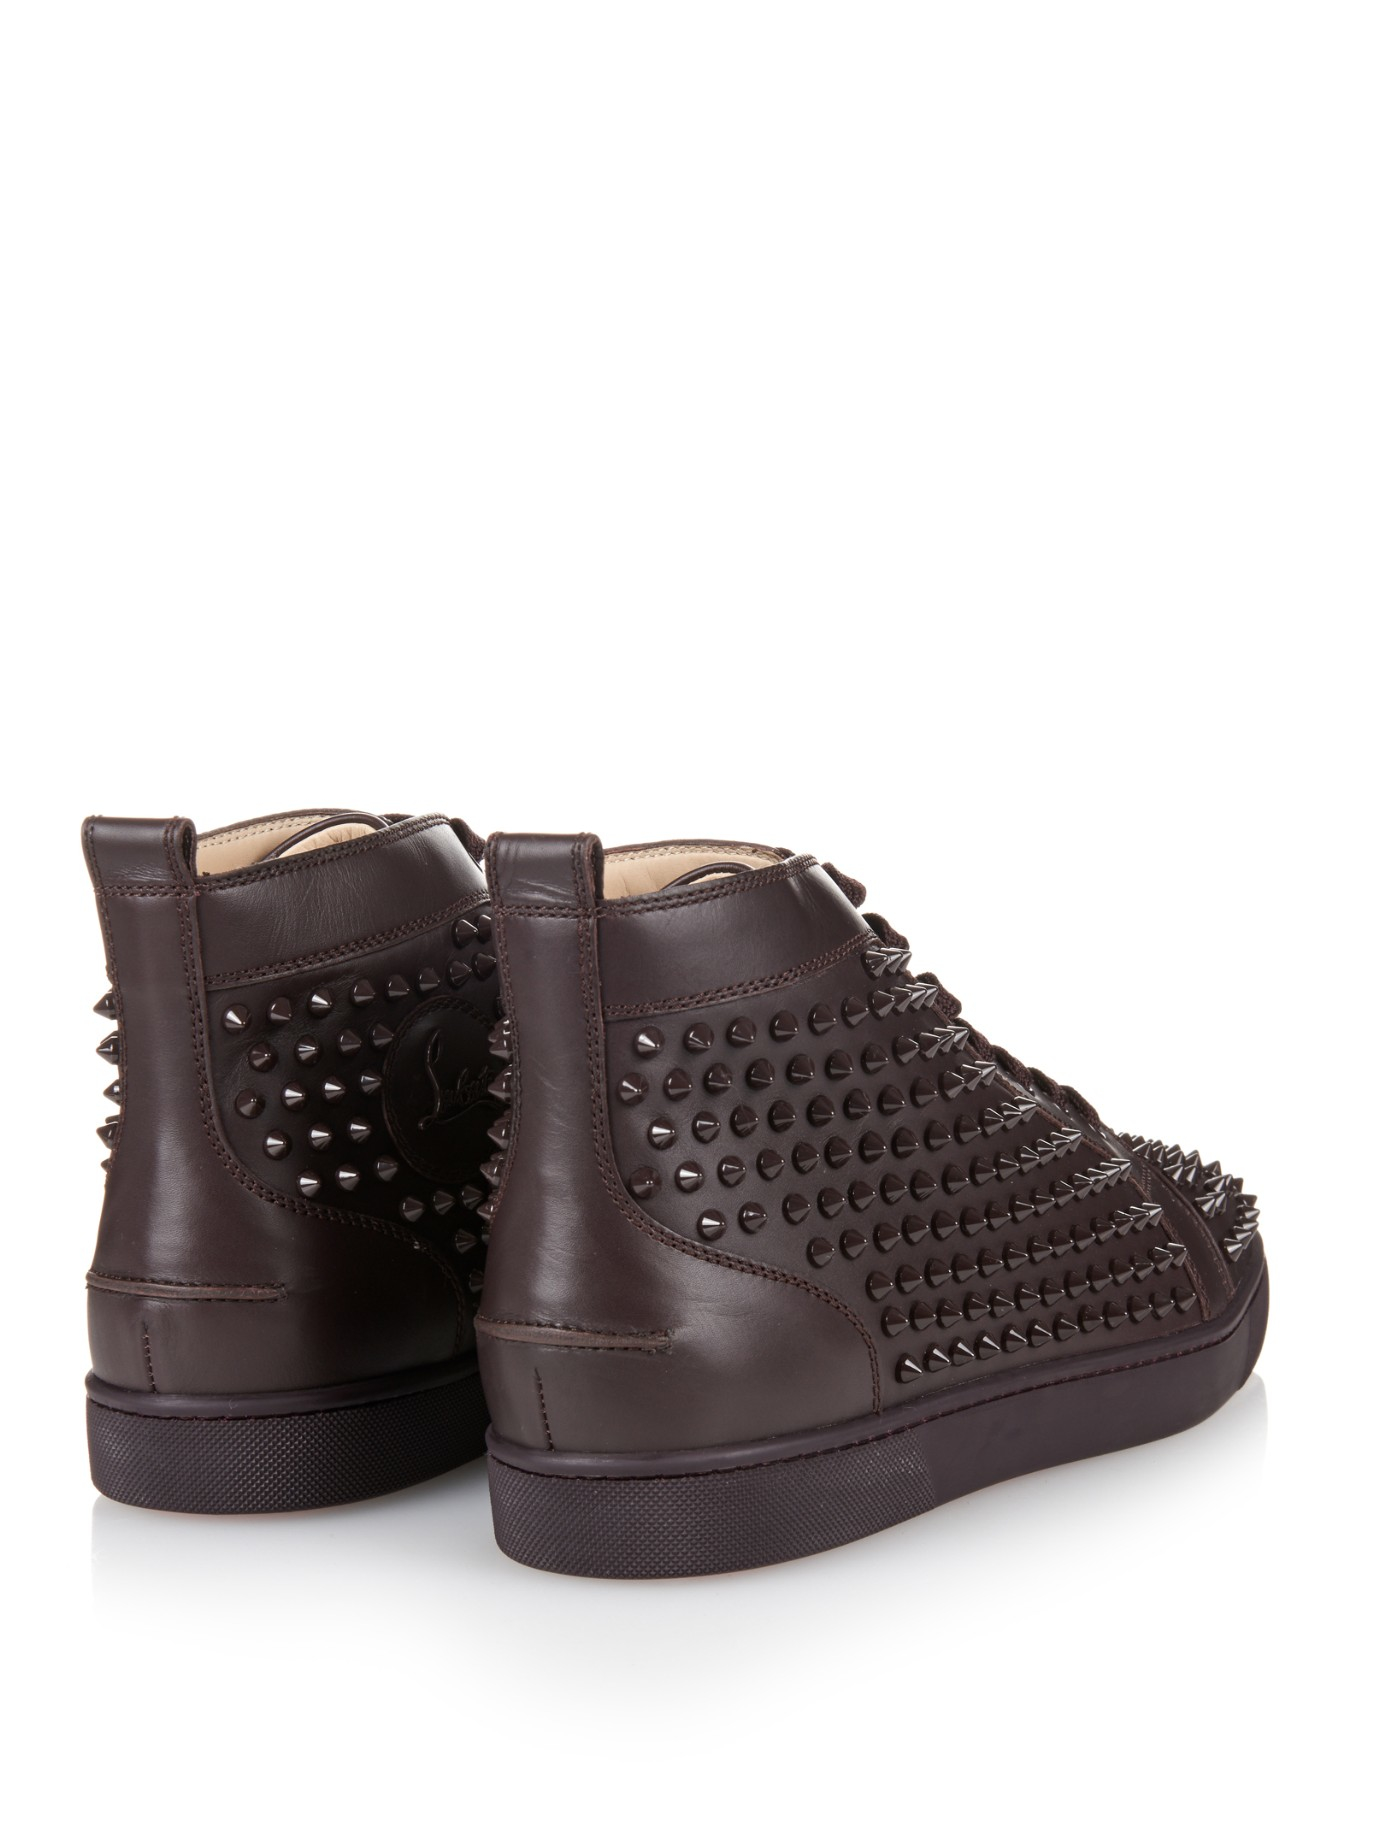 christian louboutin louis trainers - Obsidian Wellness Centre  